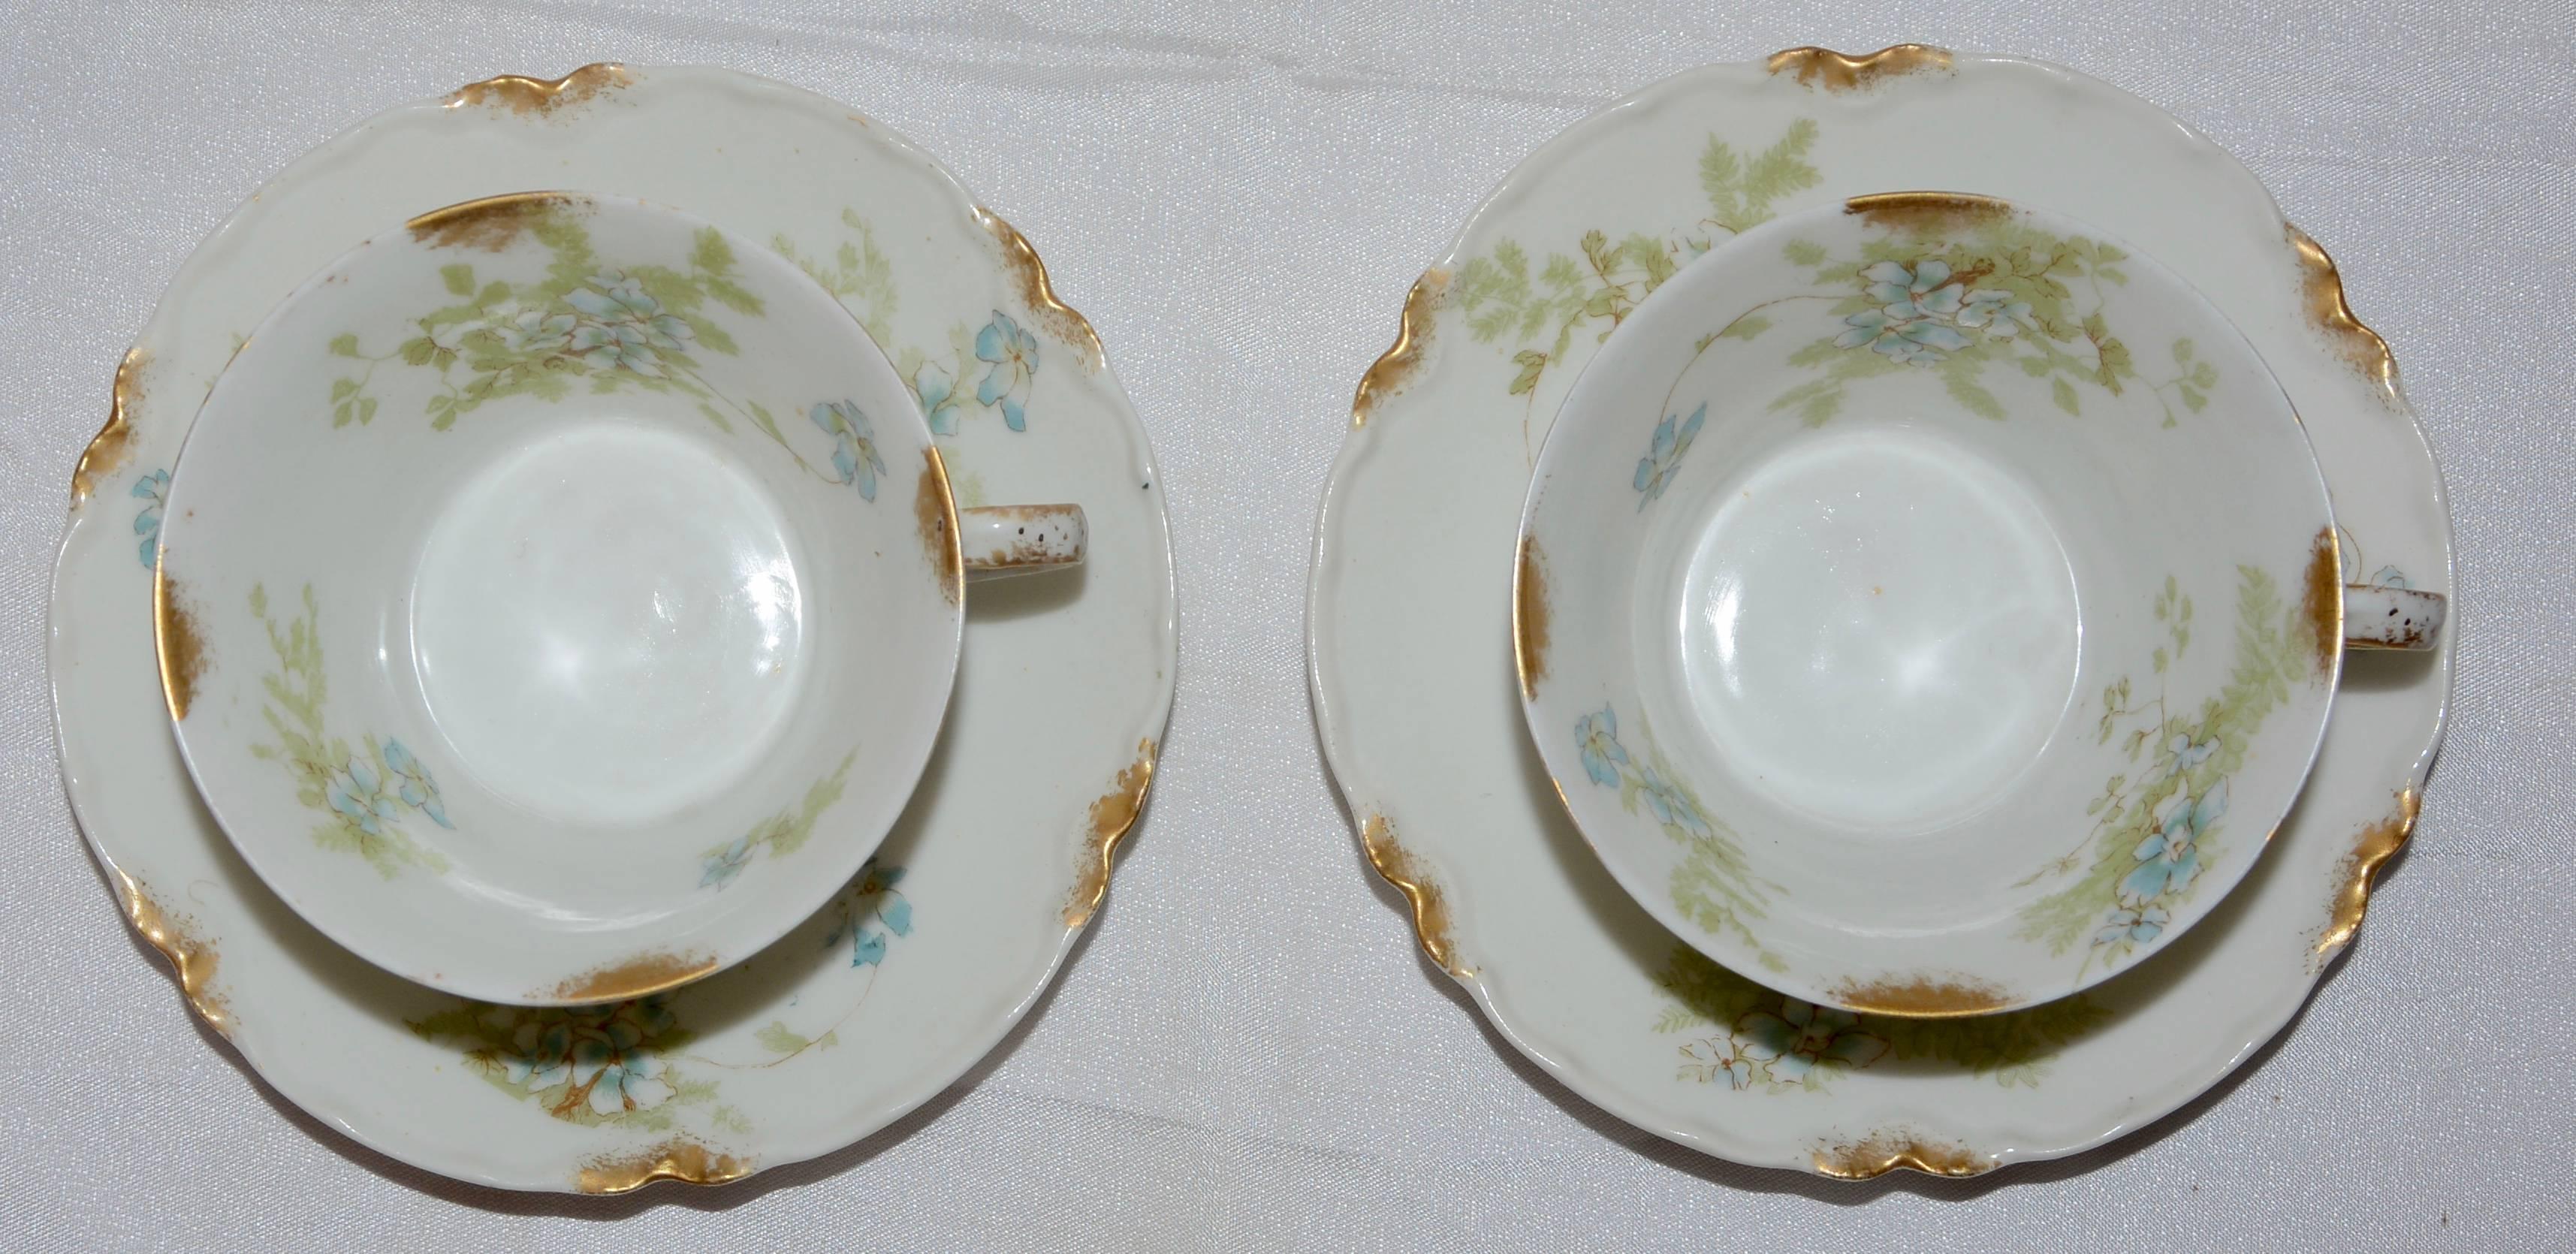 Delicate blue flowers with greenery surround this dainty set of porcelain and features accents of gold on the rims. This is a pair of demitasse cups and saucers with the porcelain by Haviland & Co. of France, Limoges and the decoration is by The Van